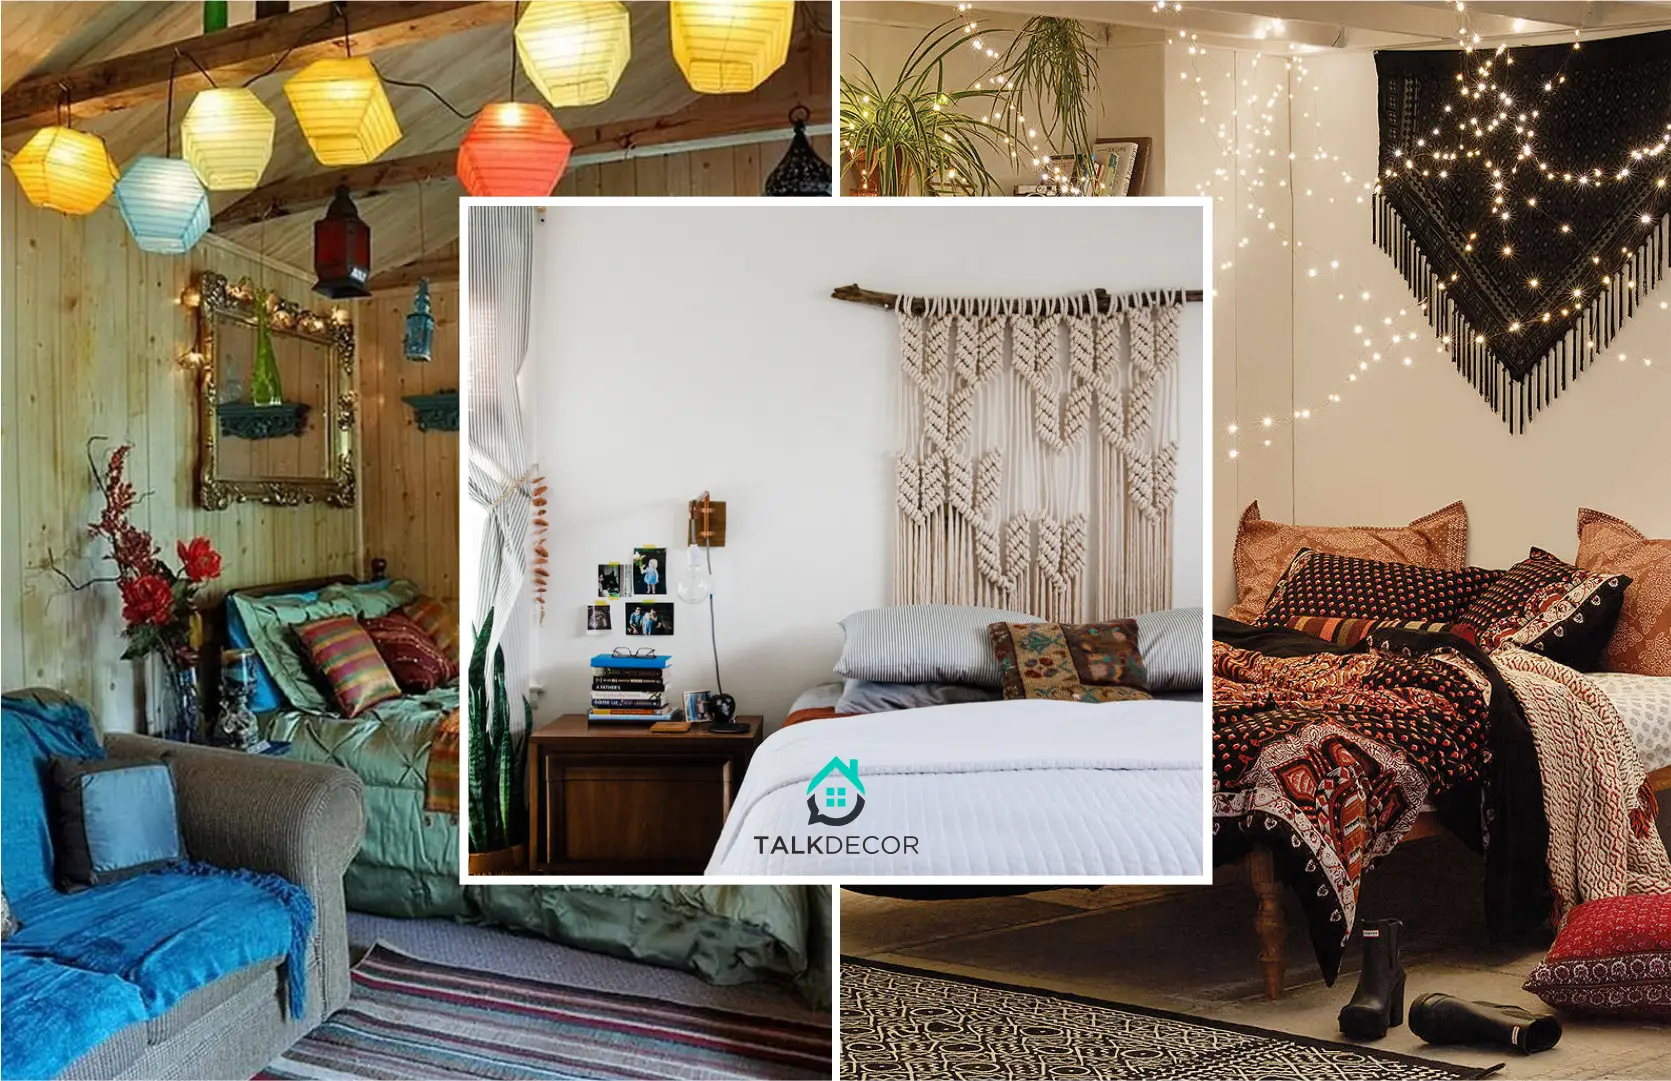 7 Must-Have Items for Your Boho Bedroom